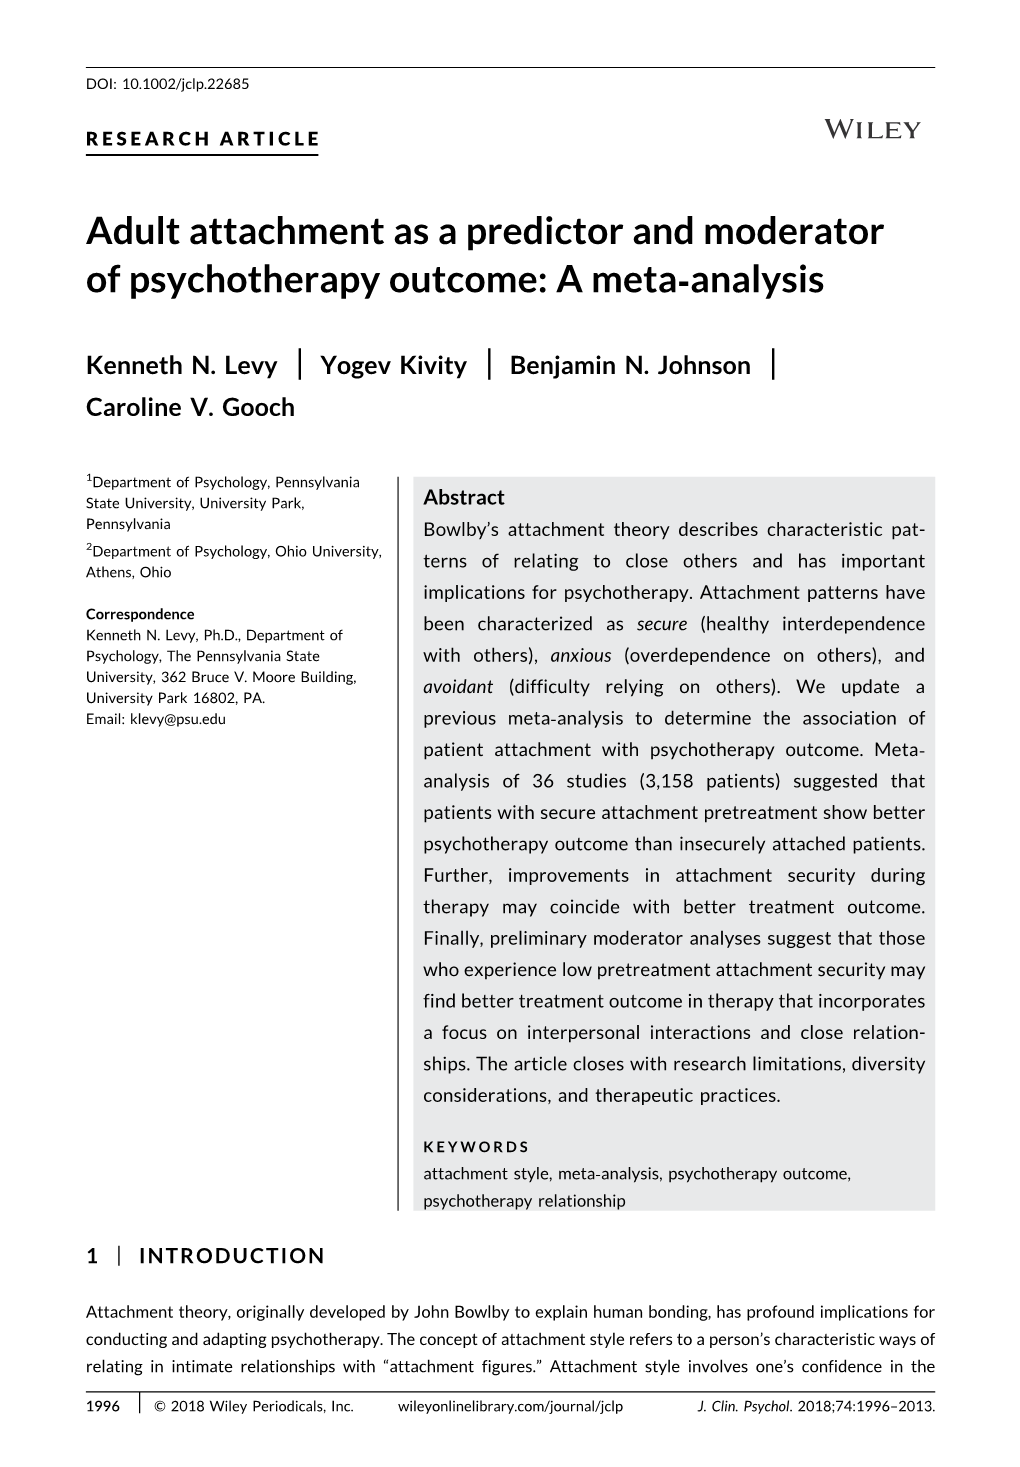 Adult Attachment As a Predictor and Moderator of Psychotherapy Outcome: a Meta‐Analysis